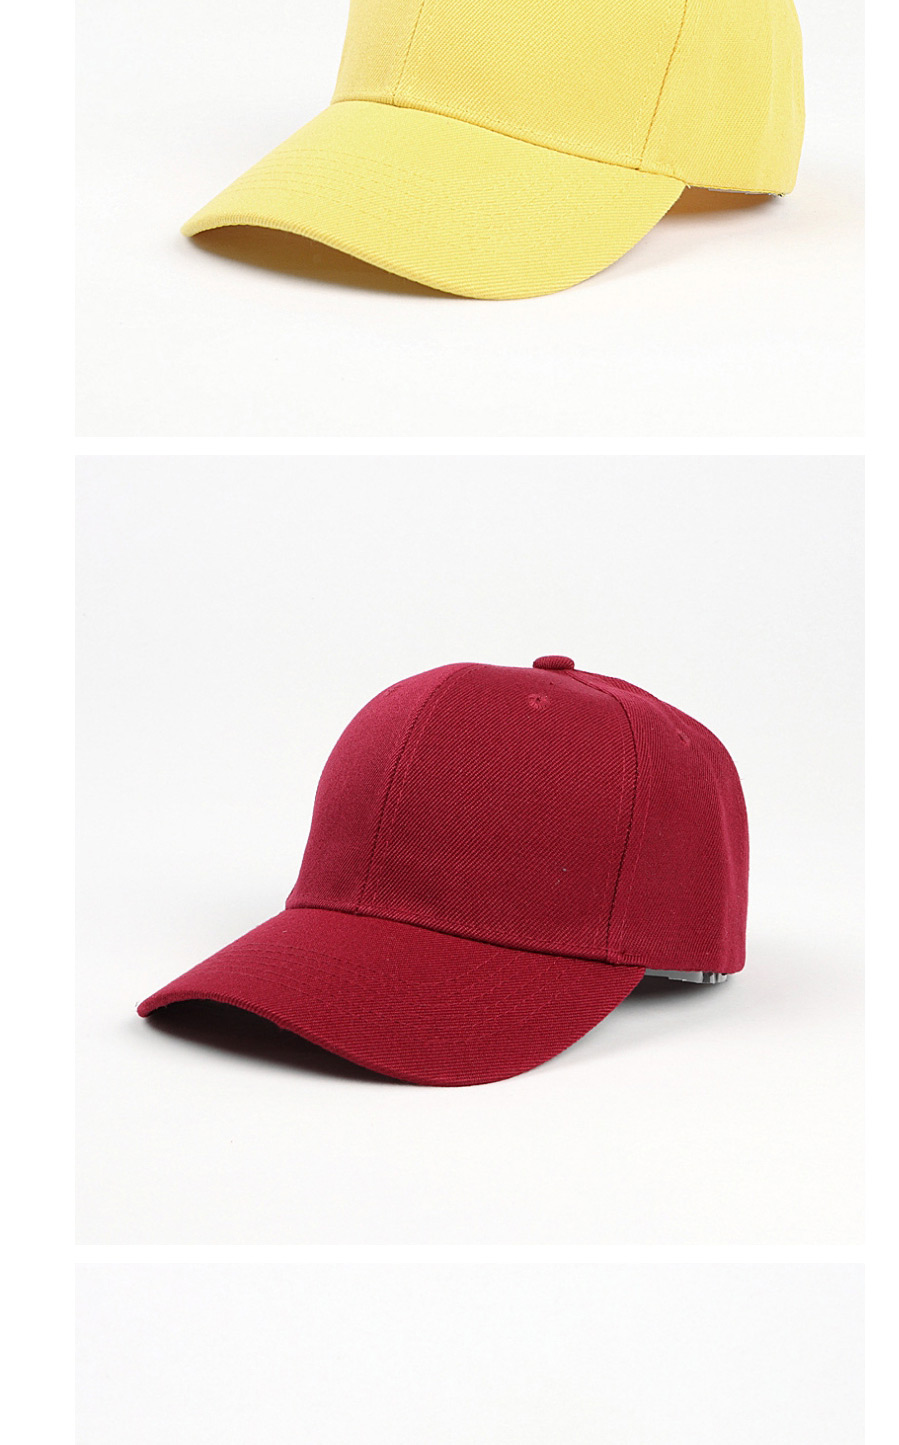 Fashion Red Light Board Solid Color Curved Brim Sunshade Cap,Baseball Caps